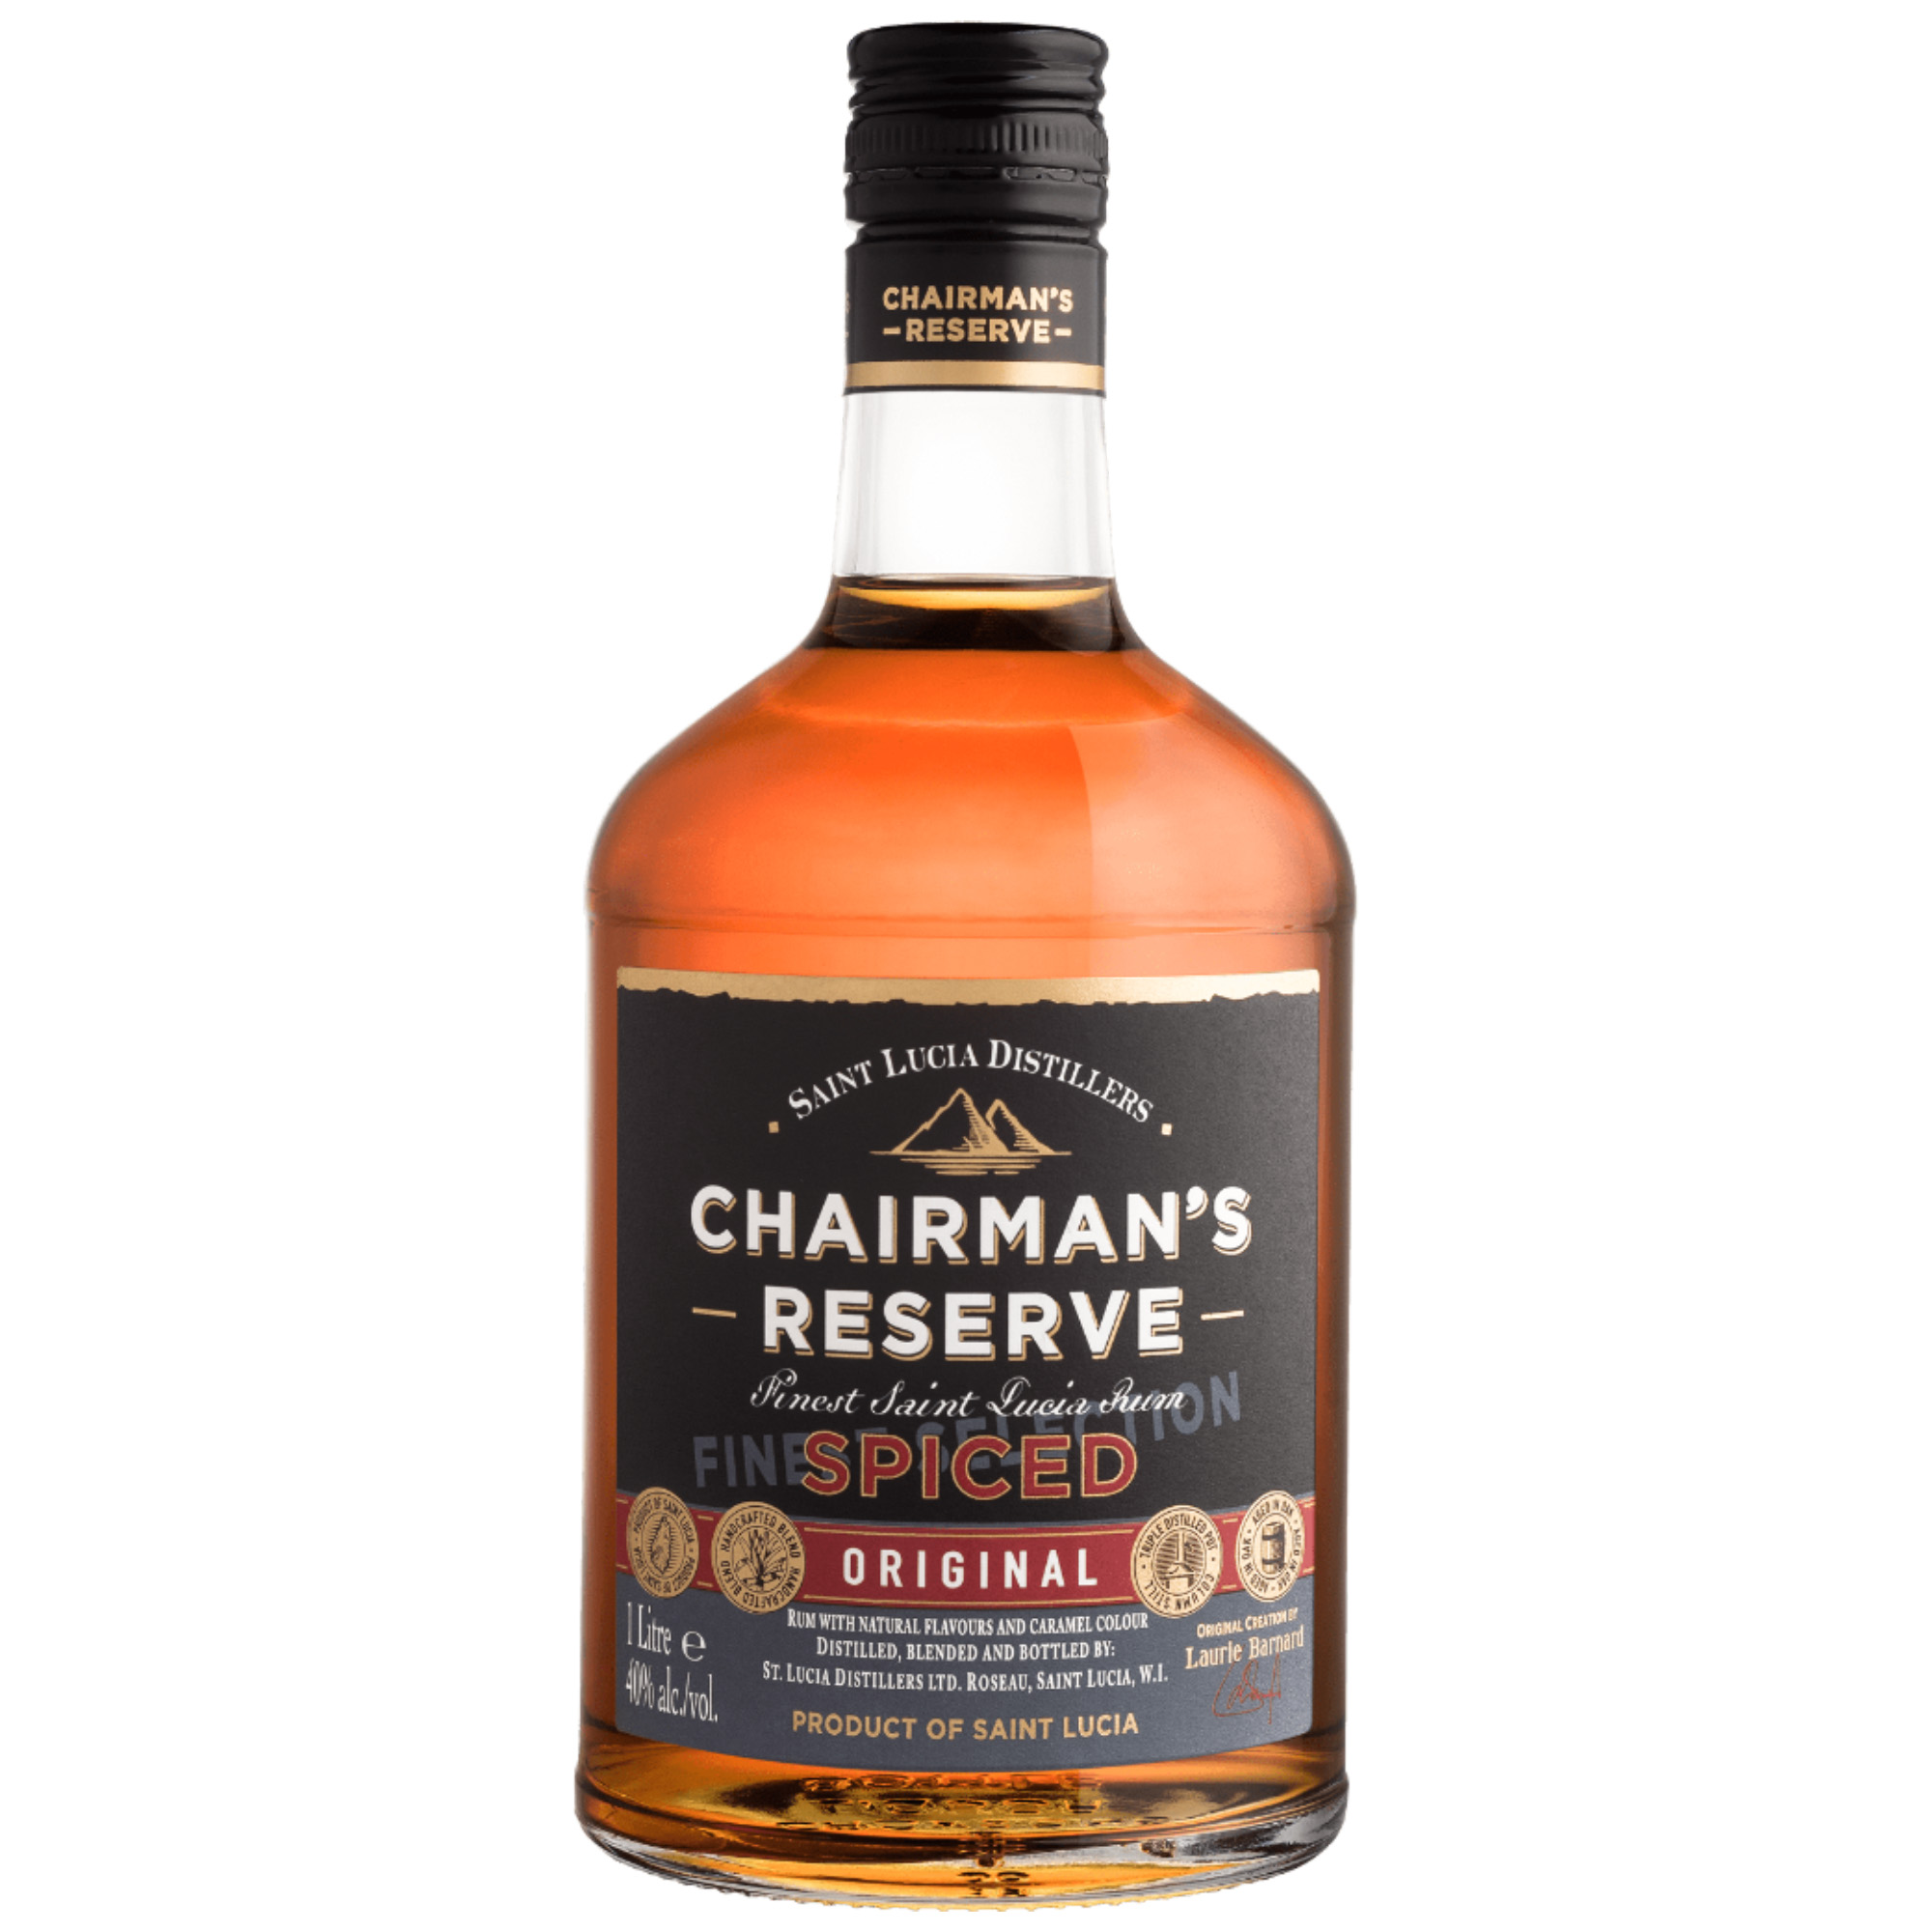 Chairman's reserve spiced